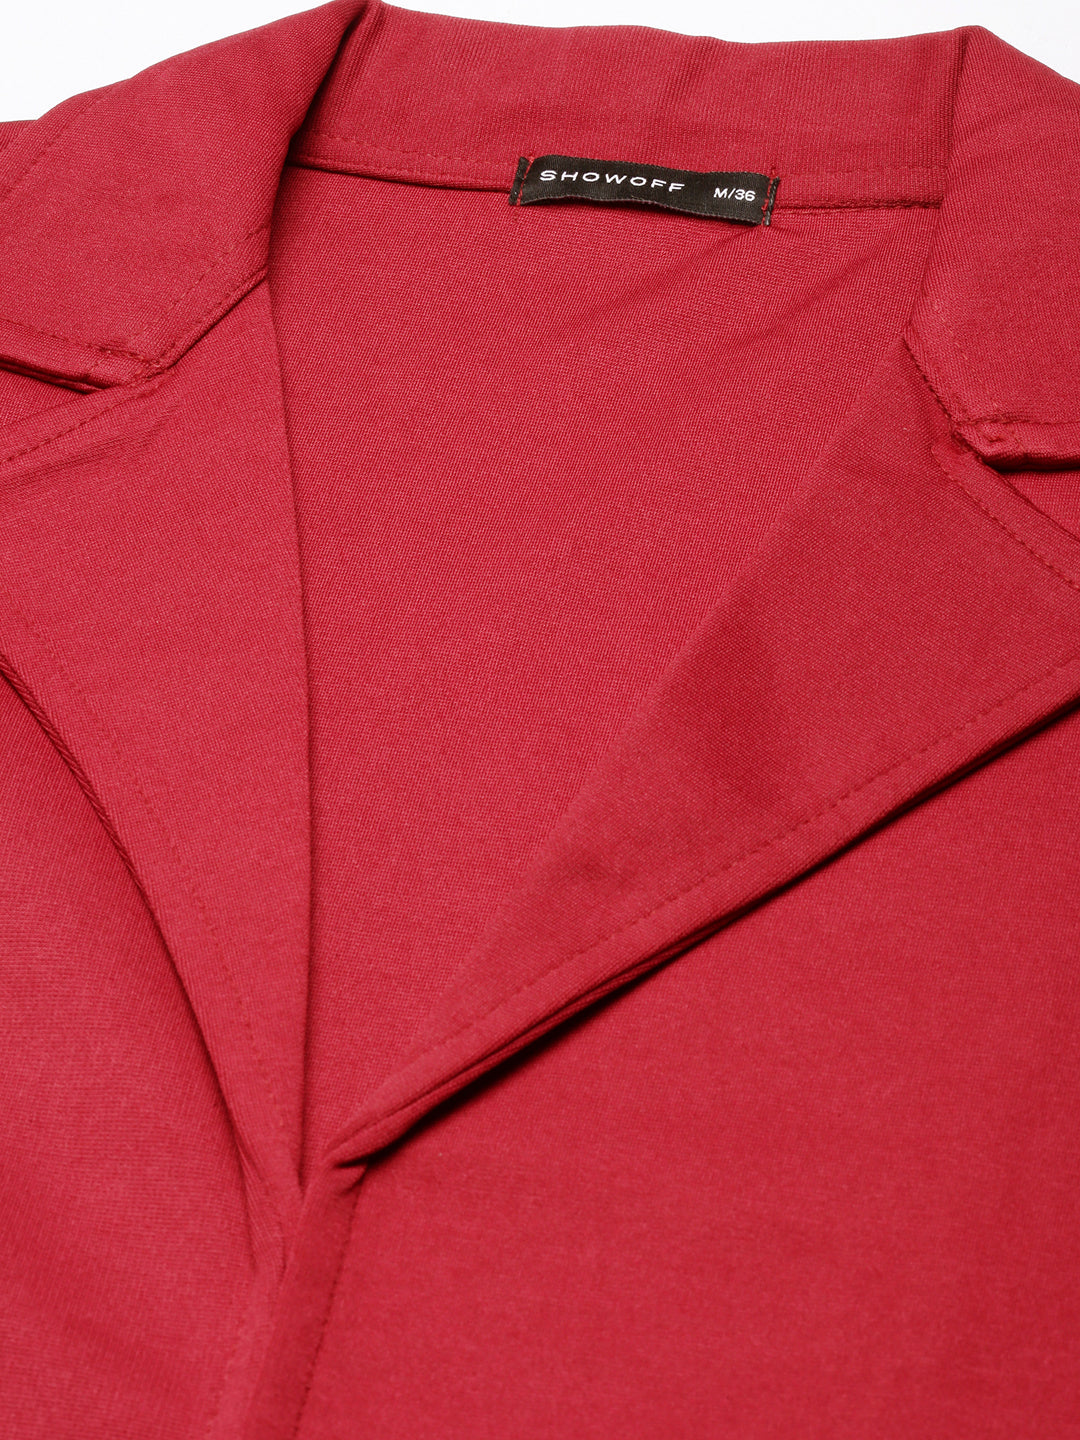 Women Red Solid Single Breasted Blazer